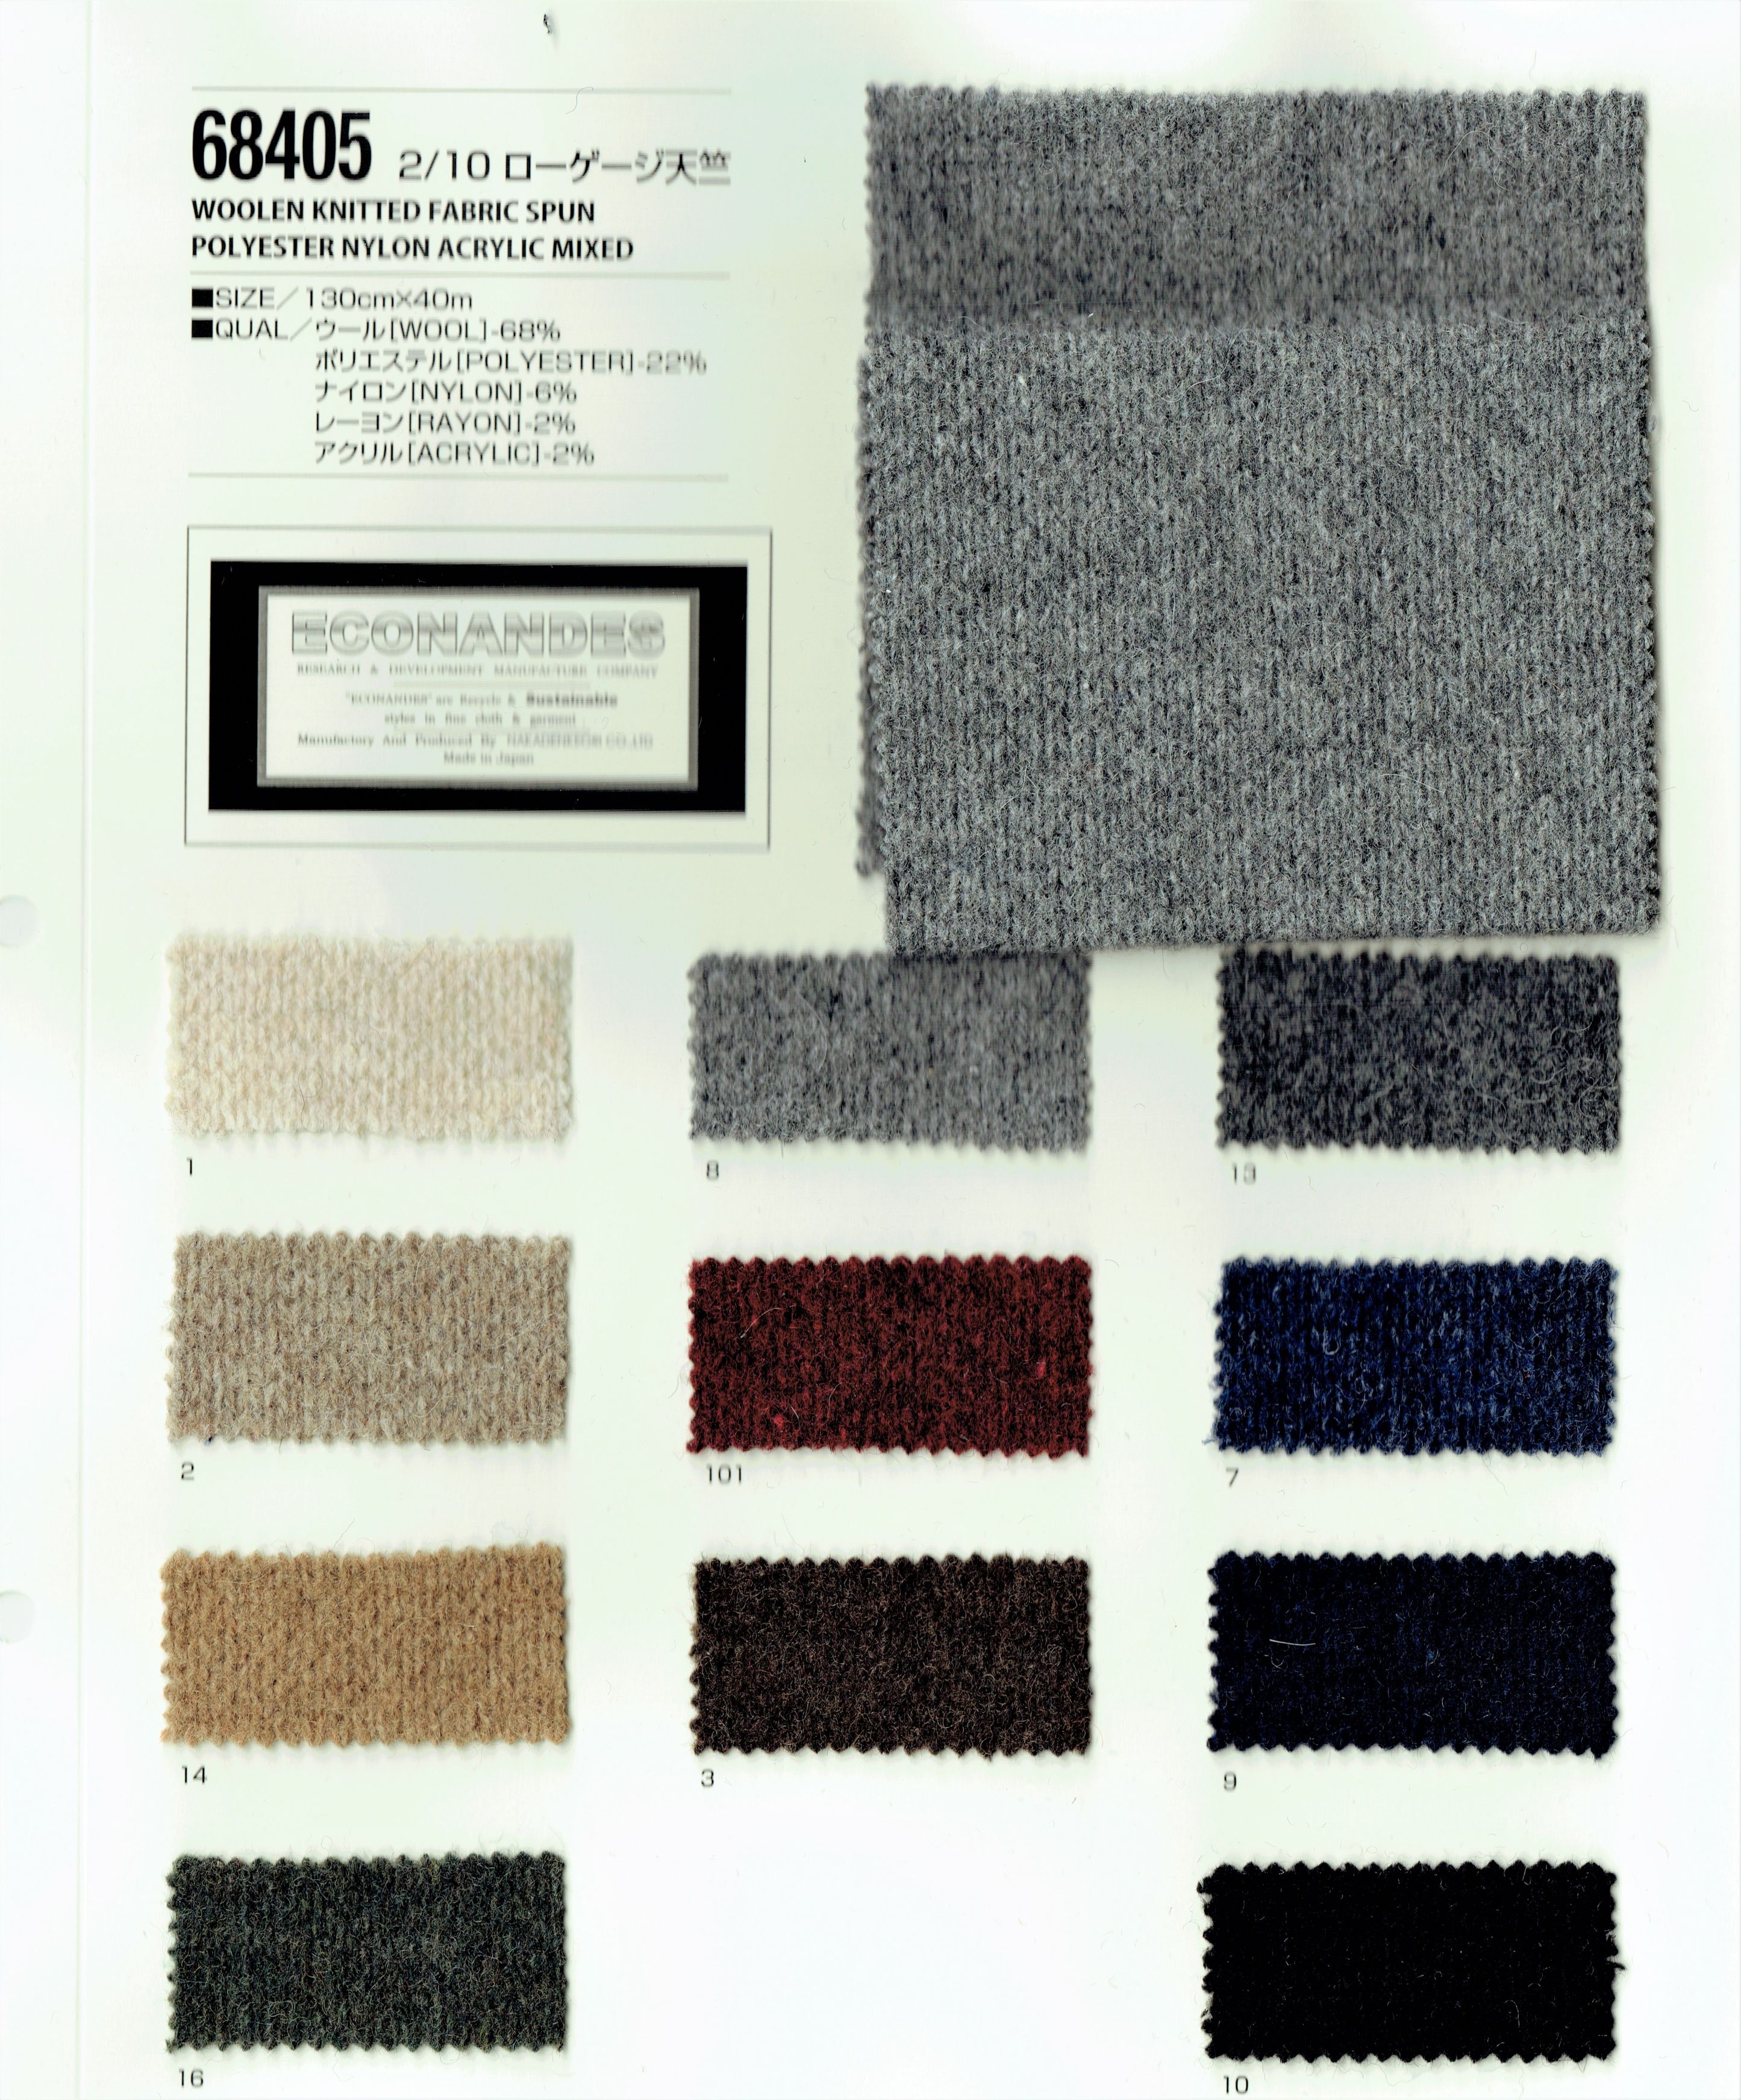 View 68% WOOLEN KNITTED FABRIC 22% POLYESTER 6% NYLON 2% ACRYLIC 2% RAYON MIXED